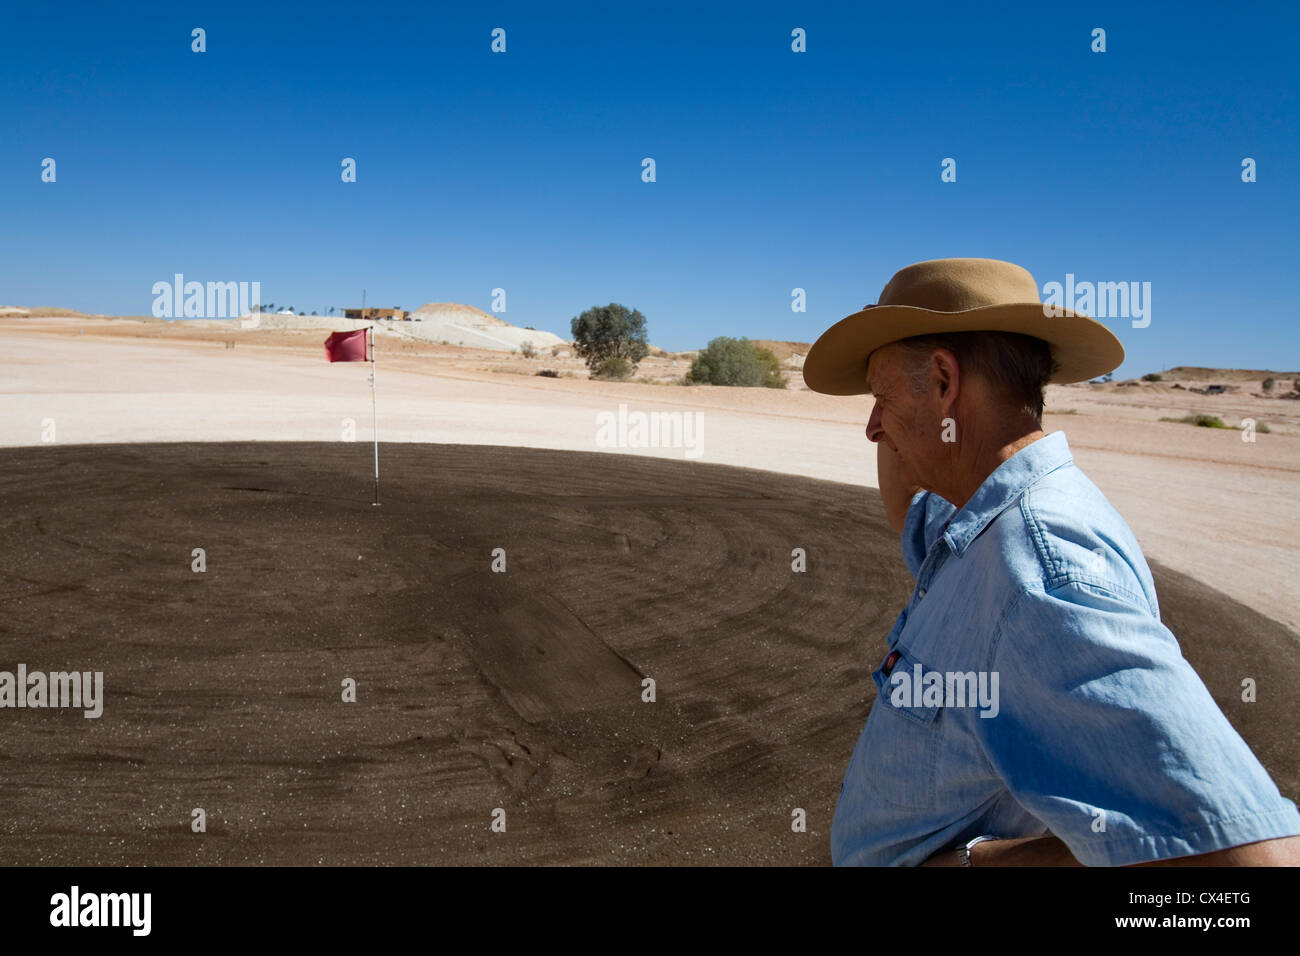 A man inspects a puttting green on the Coober Pedy golf course.  Coober Pedy, South Australia, AUSTRALIA Stock Photo